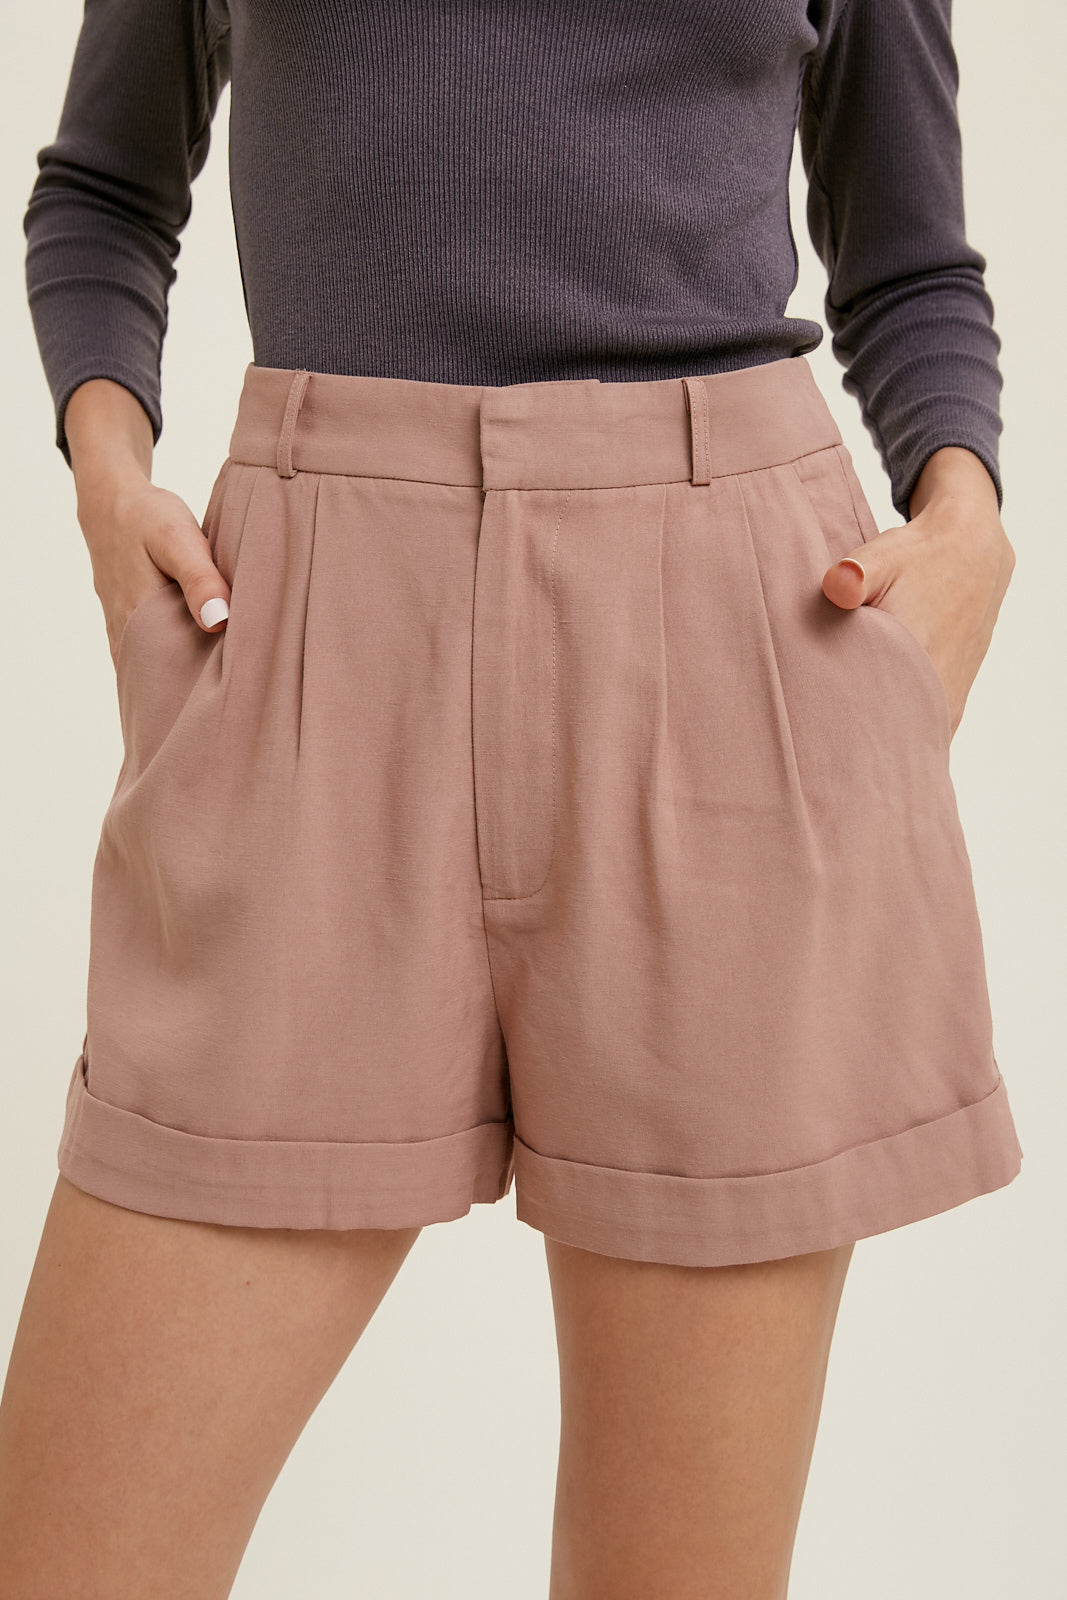 Wishlist® Cuffed Pleated Shorts with side pockets- Rose